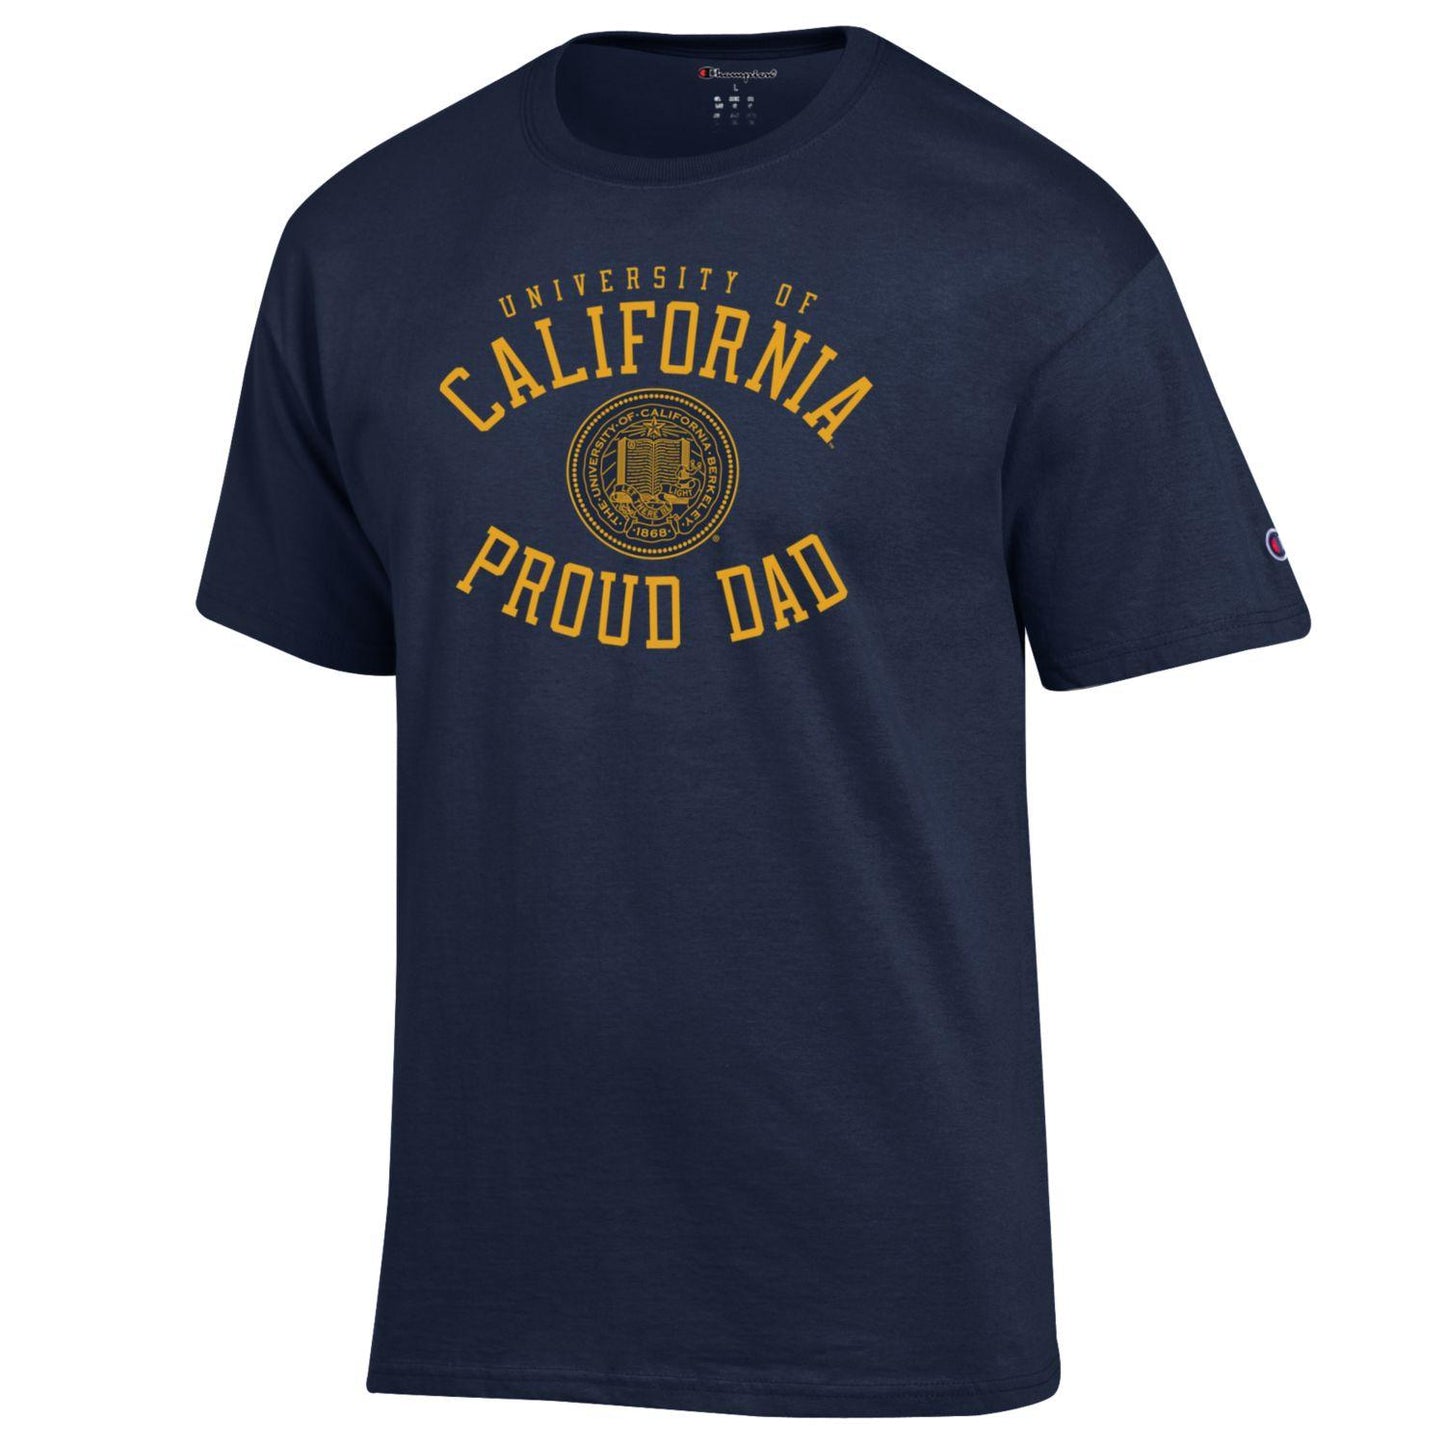 UCLA Bruins Dad Officially Licensed T-Shirt